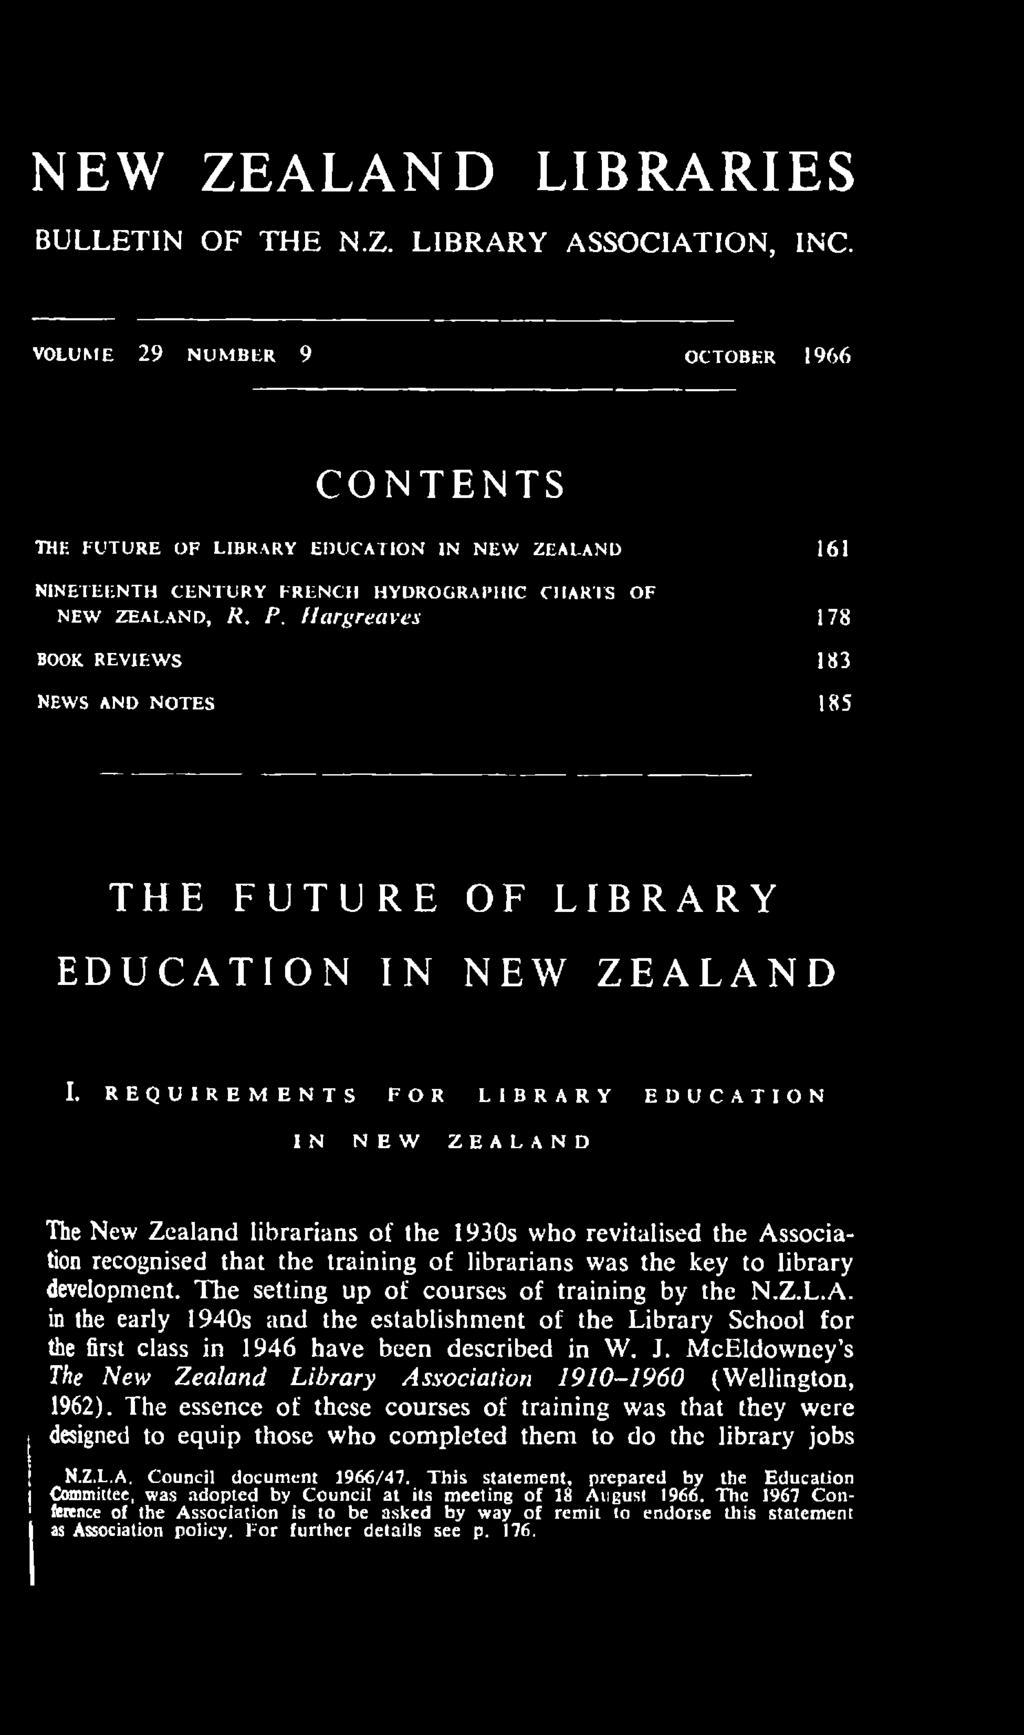 development. T h e setting up o f courses o f training by the N.Z.L.A. in the early 1940s and the establishm ent o f the L ibrary School for the first class in 1946 have been described in W. J.